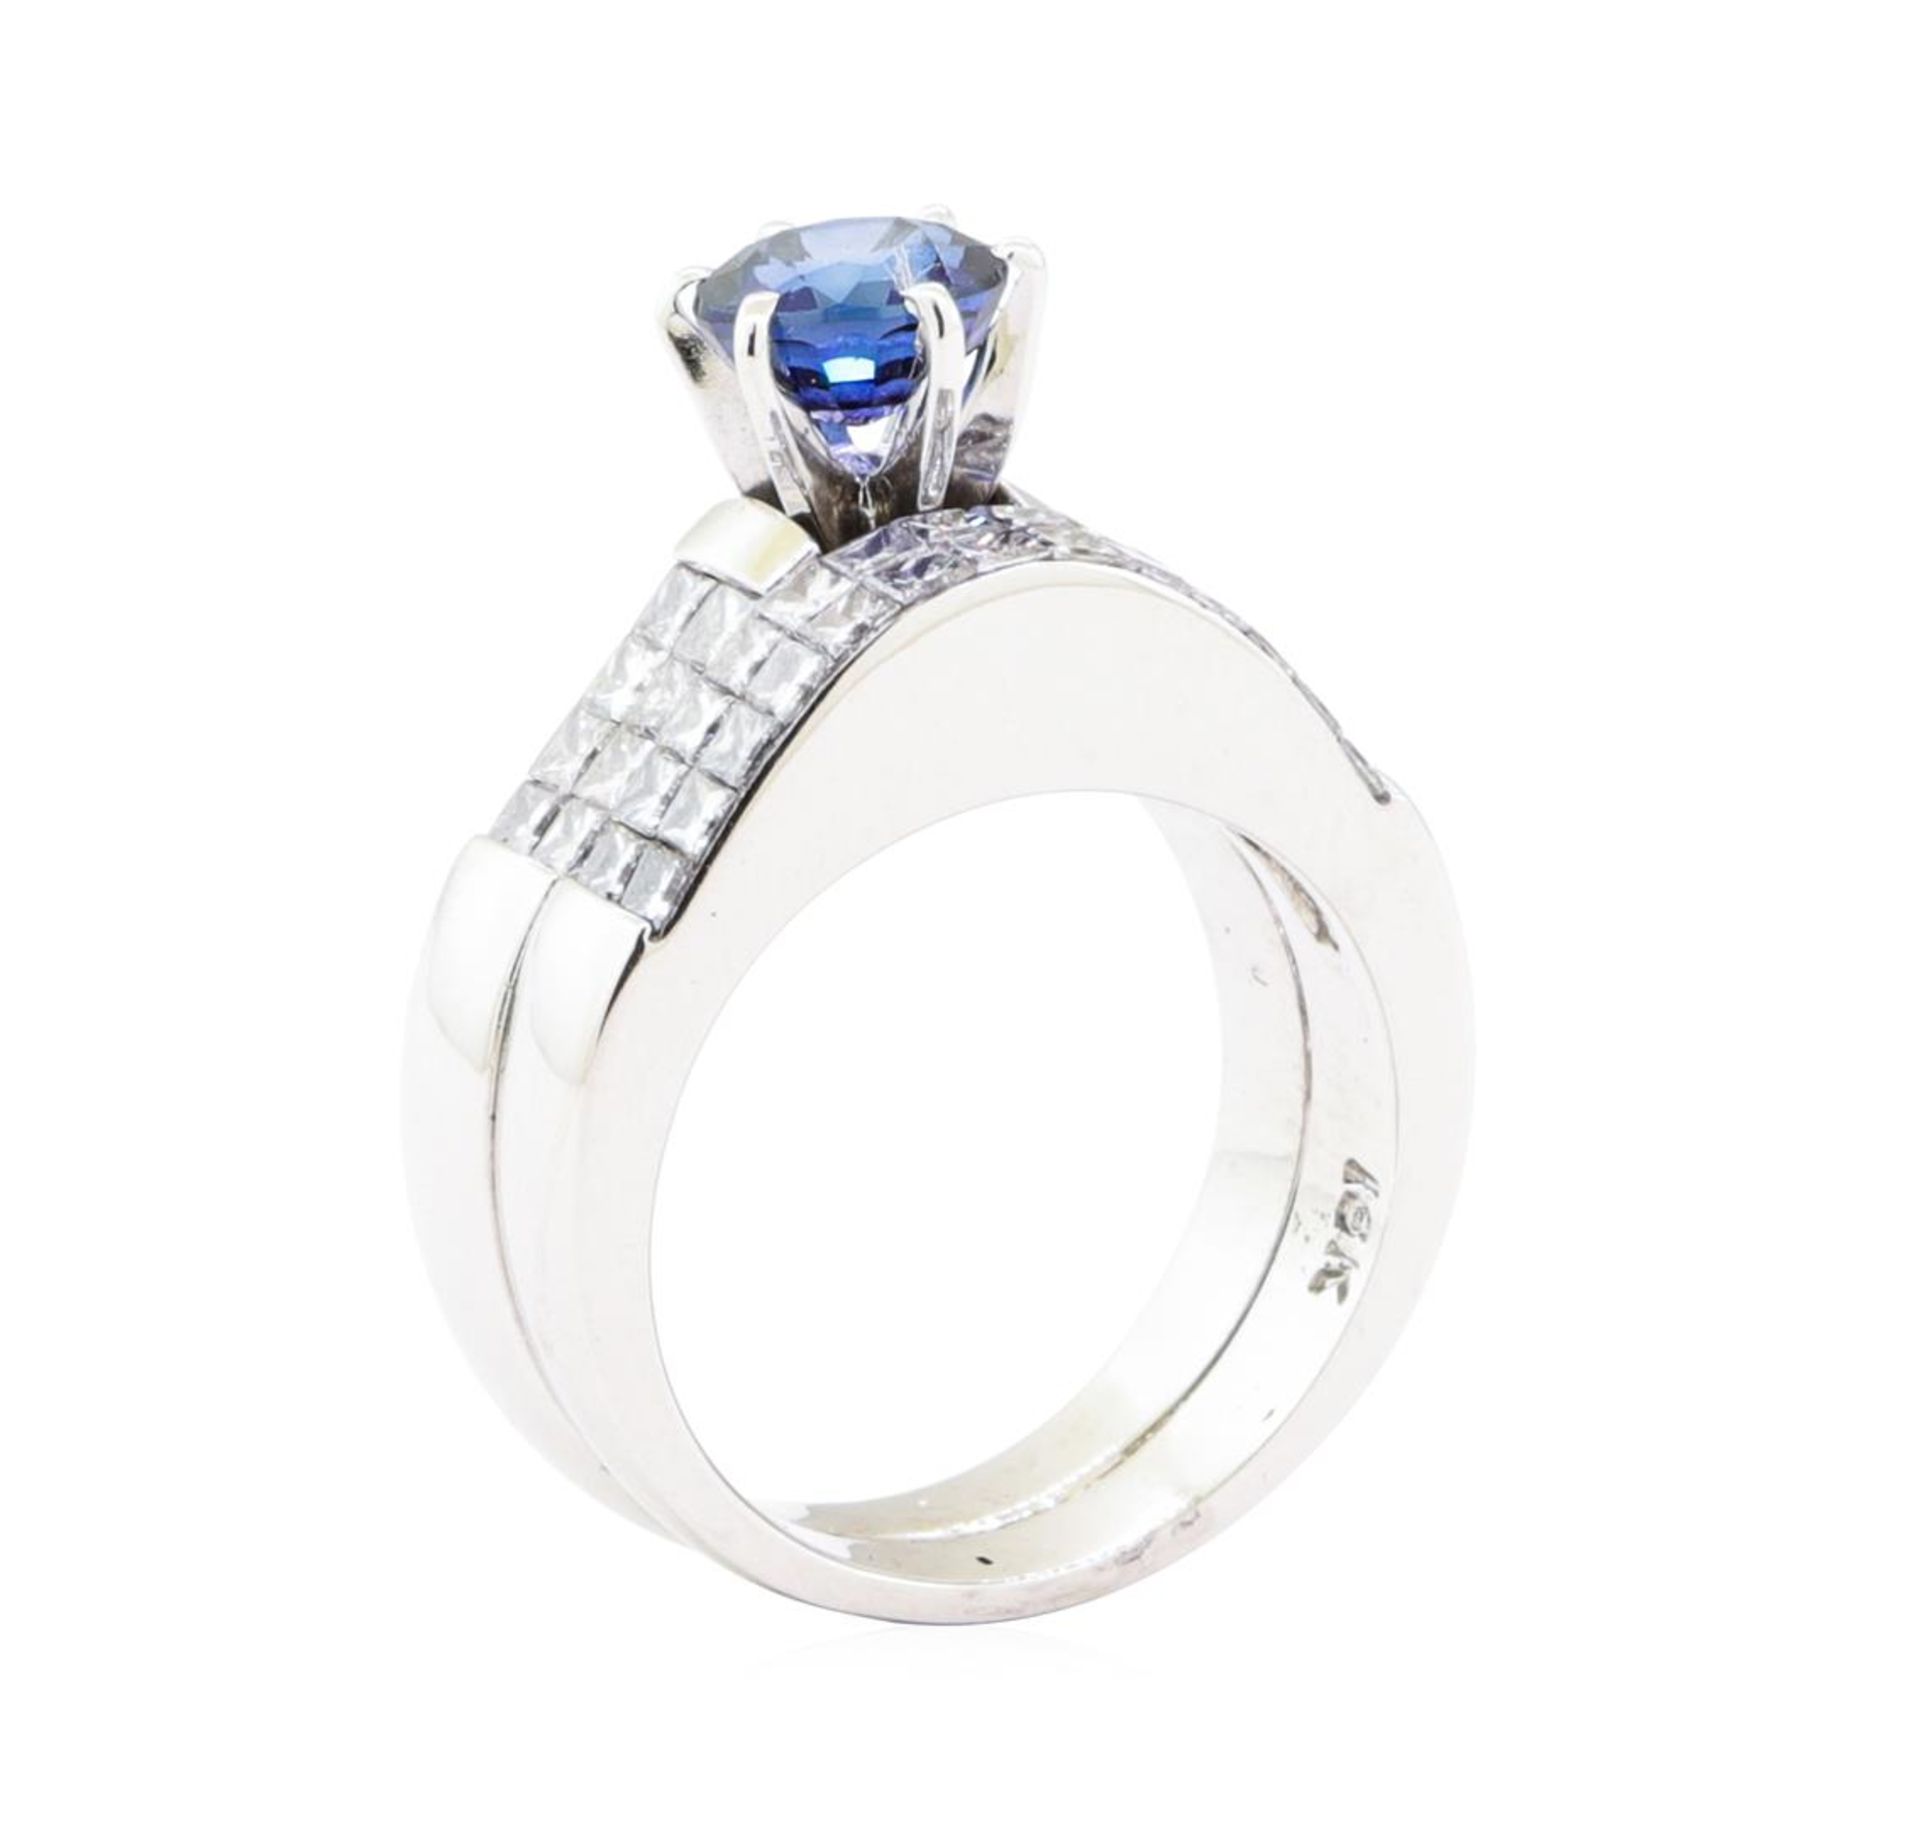 2.49 ctw Sapphire And Diamond Ring And Attached Band - 18KT White Gold - Image 4 of 5